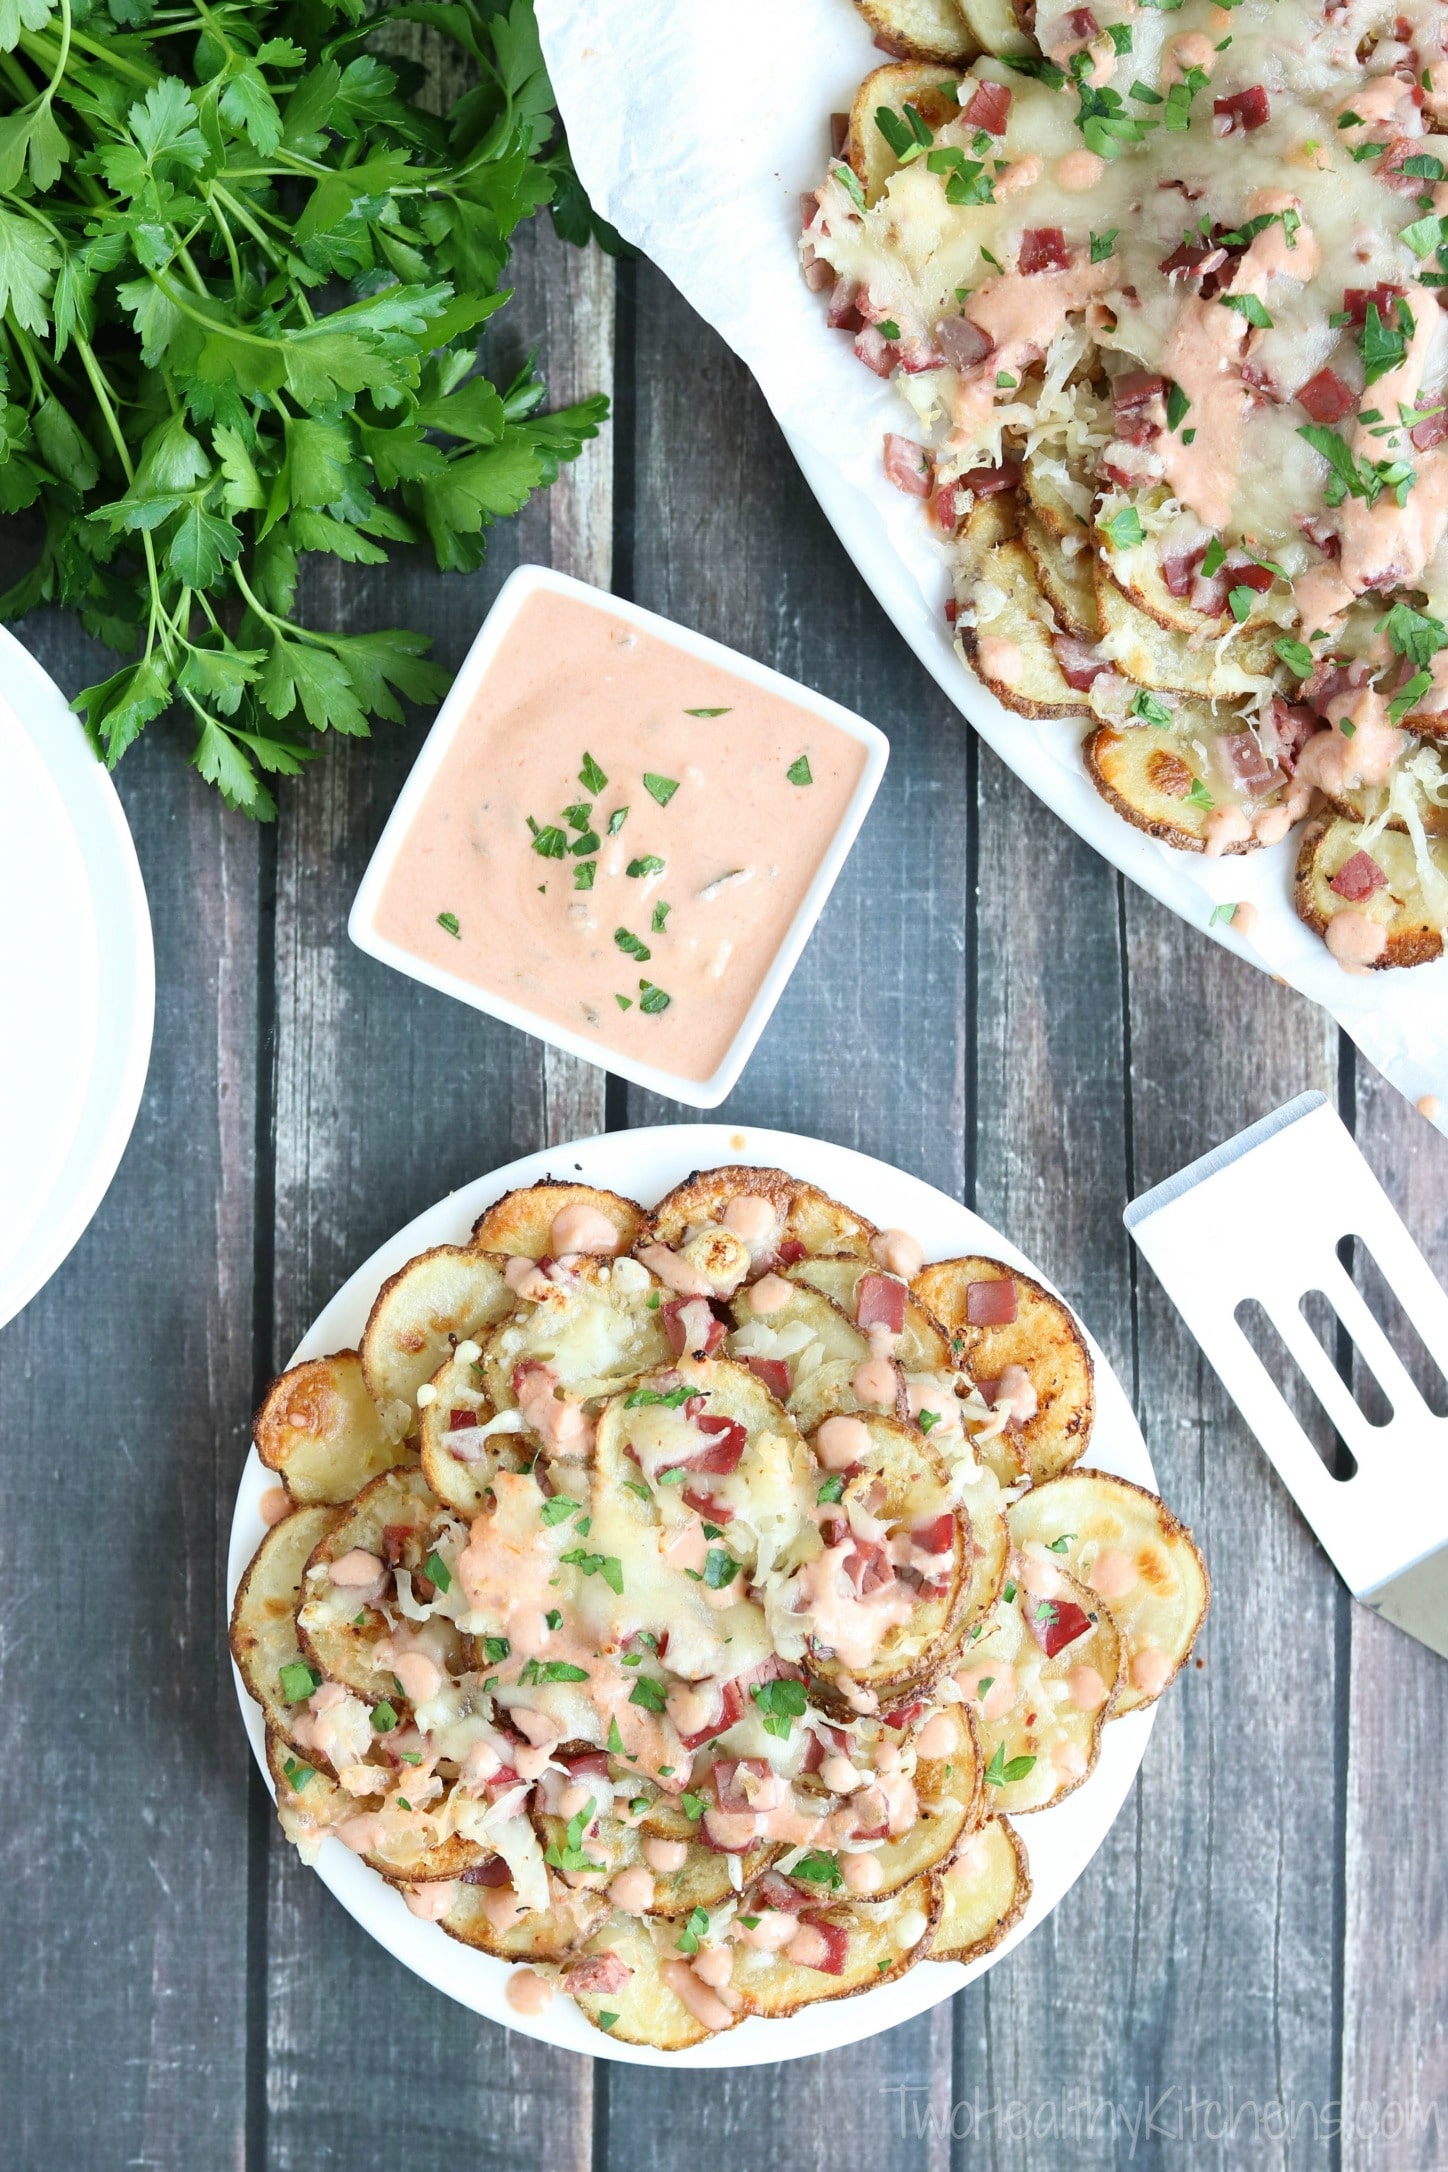 These Reuben-Topped Irish Nachos feature seasoned, oven-baked potato chips, plus delicious toppings loaded with the ever-popular flavors of a reuben sandwich! Easy to make, seriously delicious! | www.TwoHealthyKitchens.com